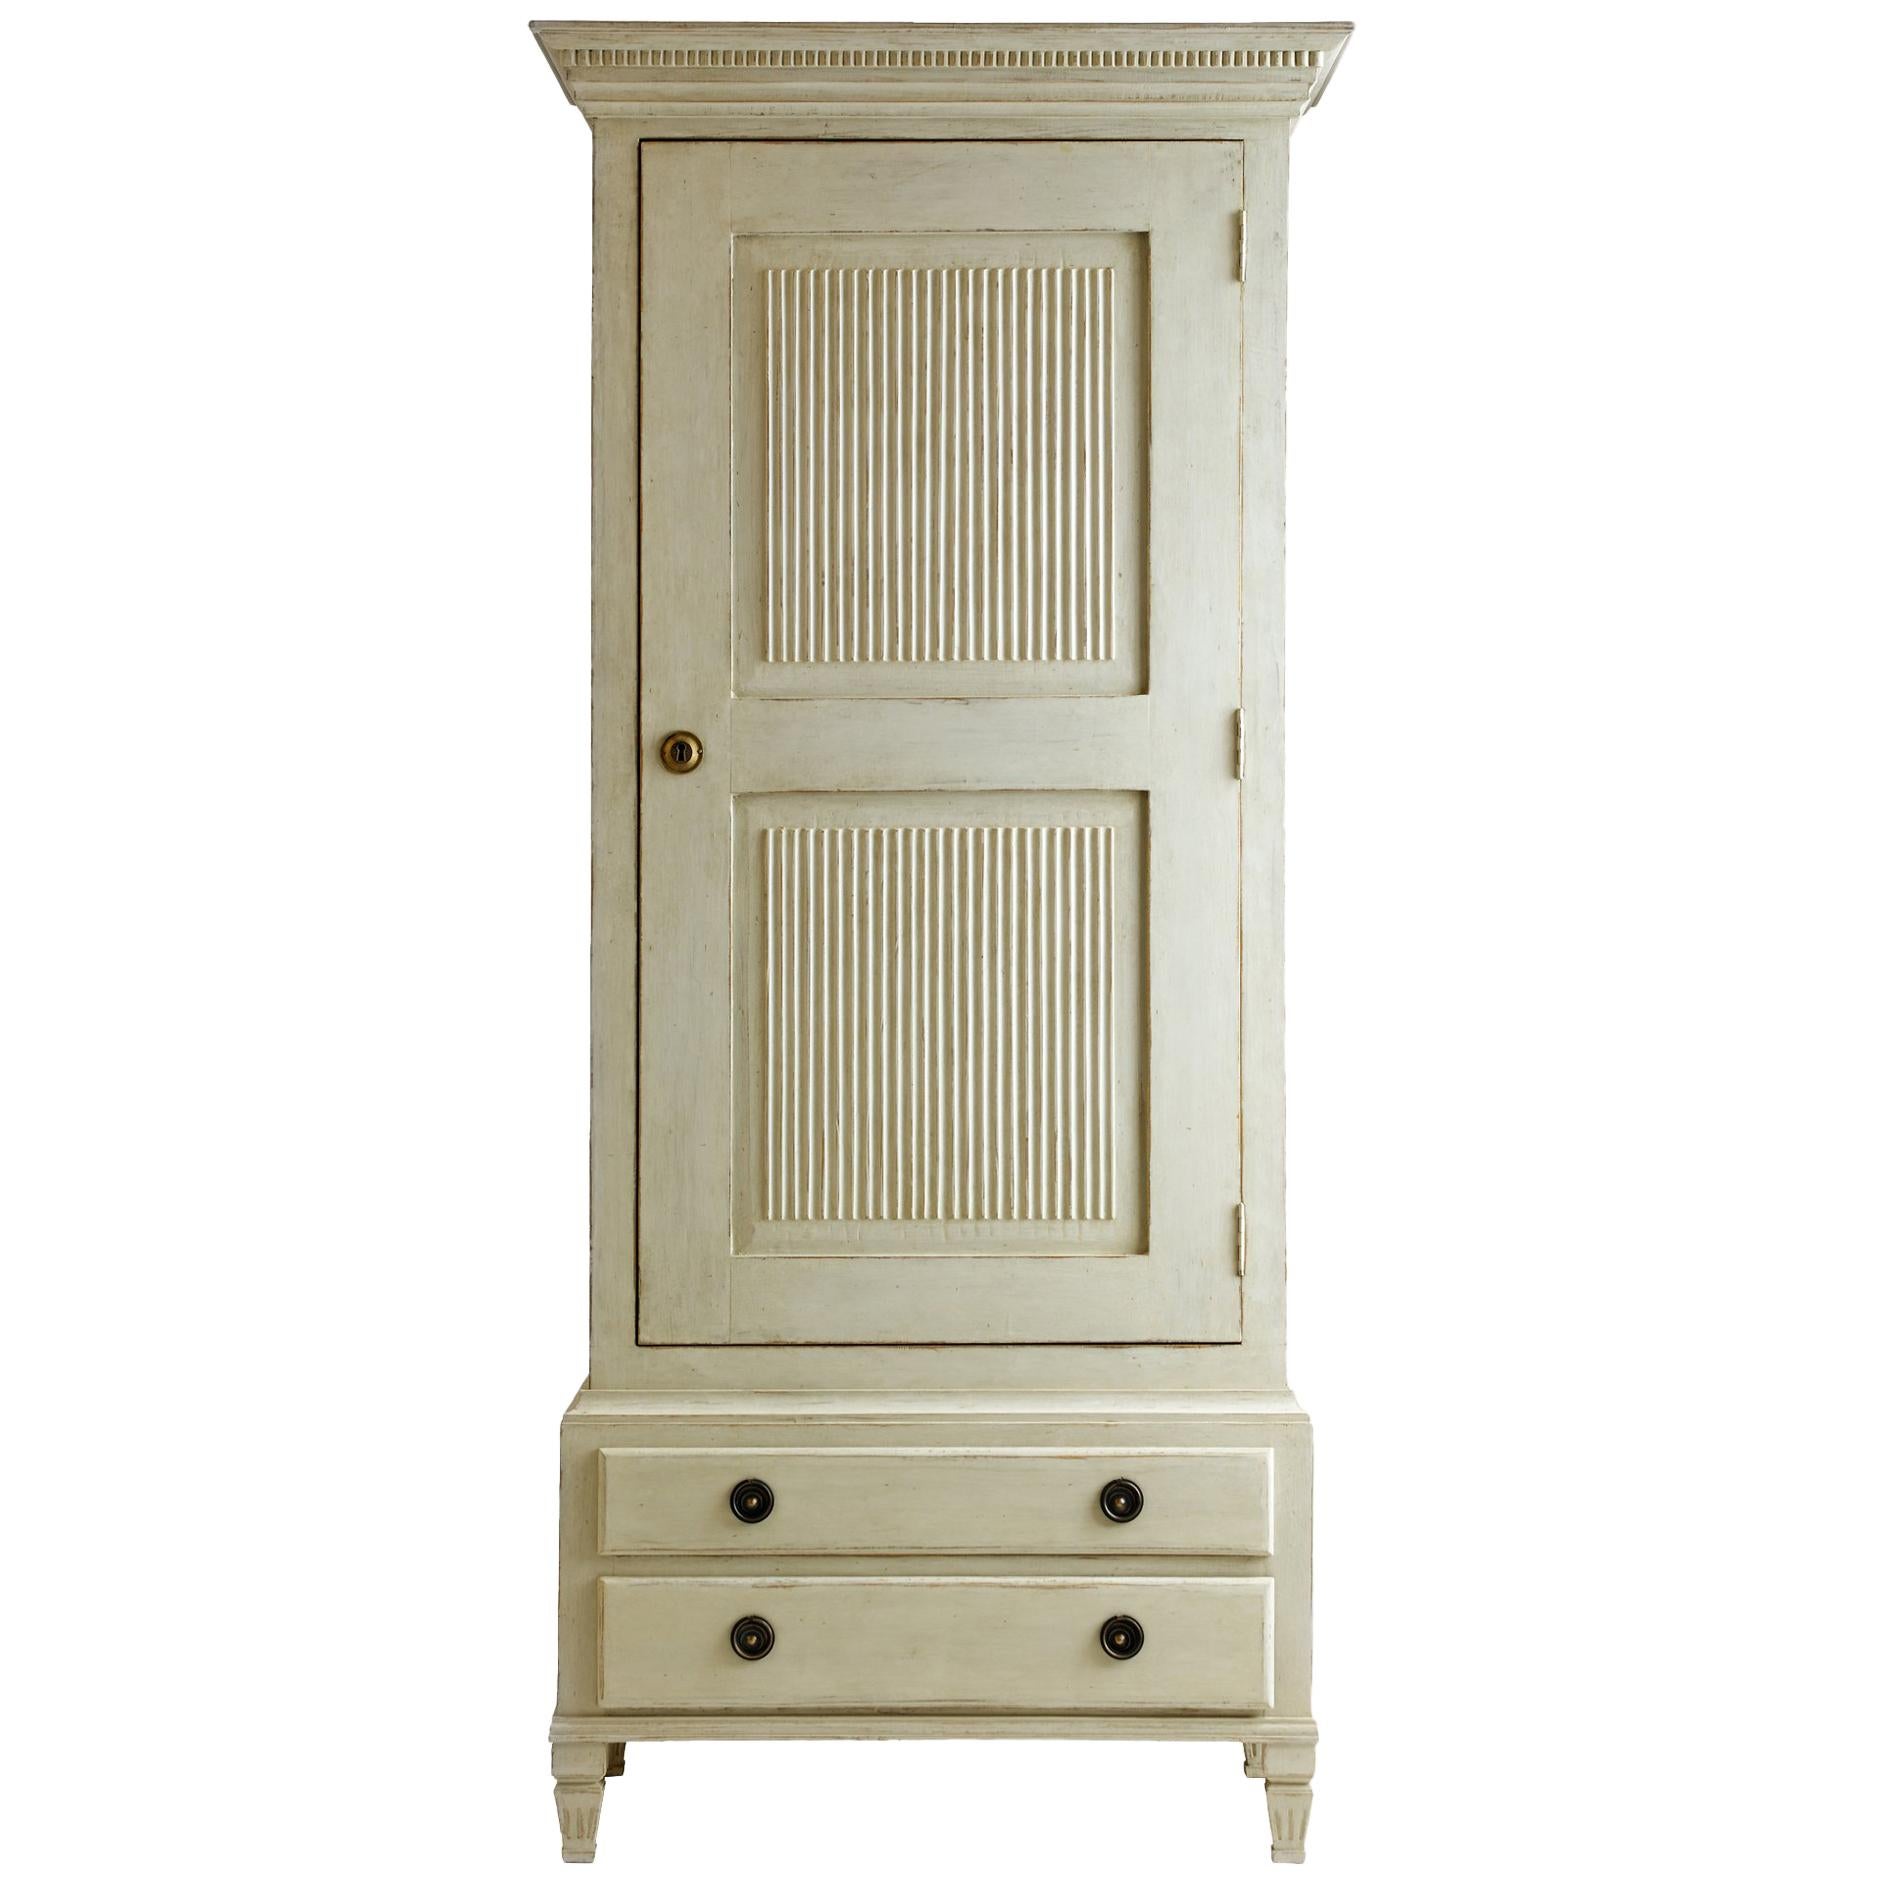 Antique White Distressed Painted Wardrobe Cabinet with Shelves and Safe For Sale